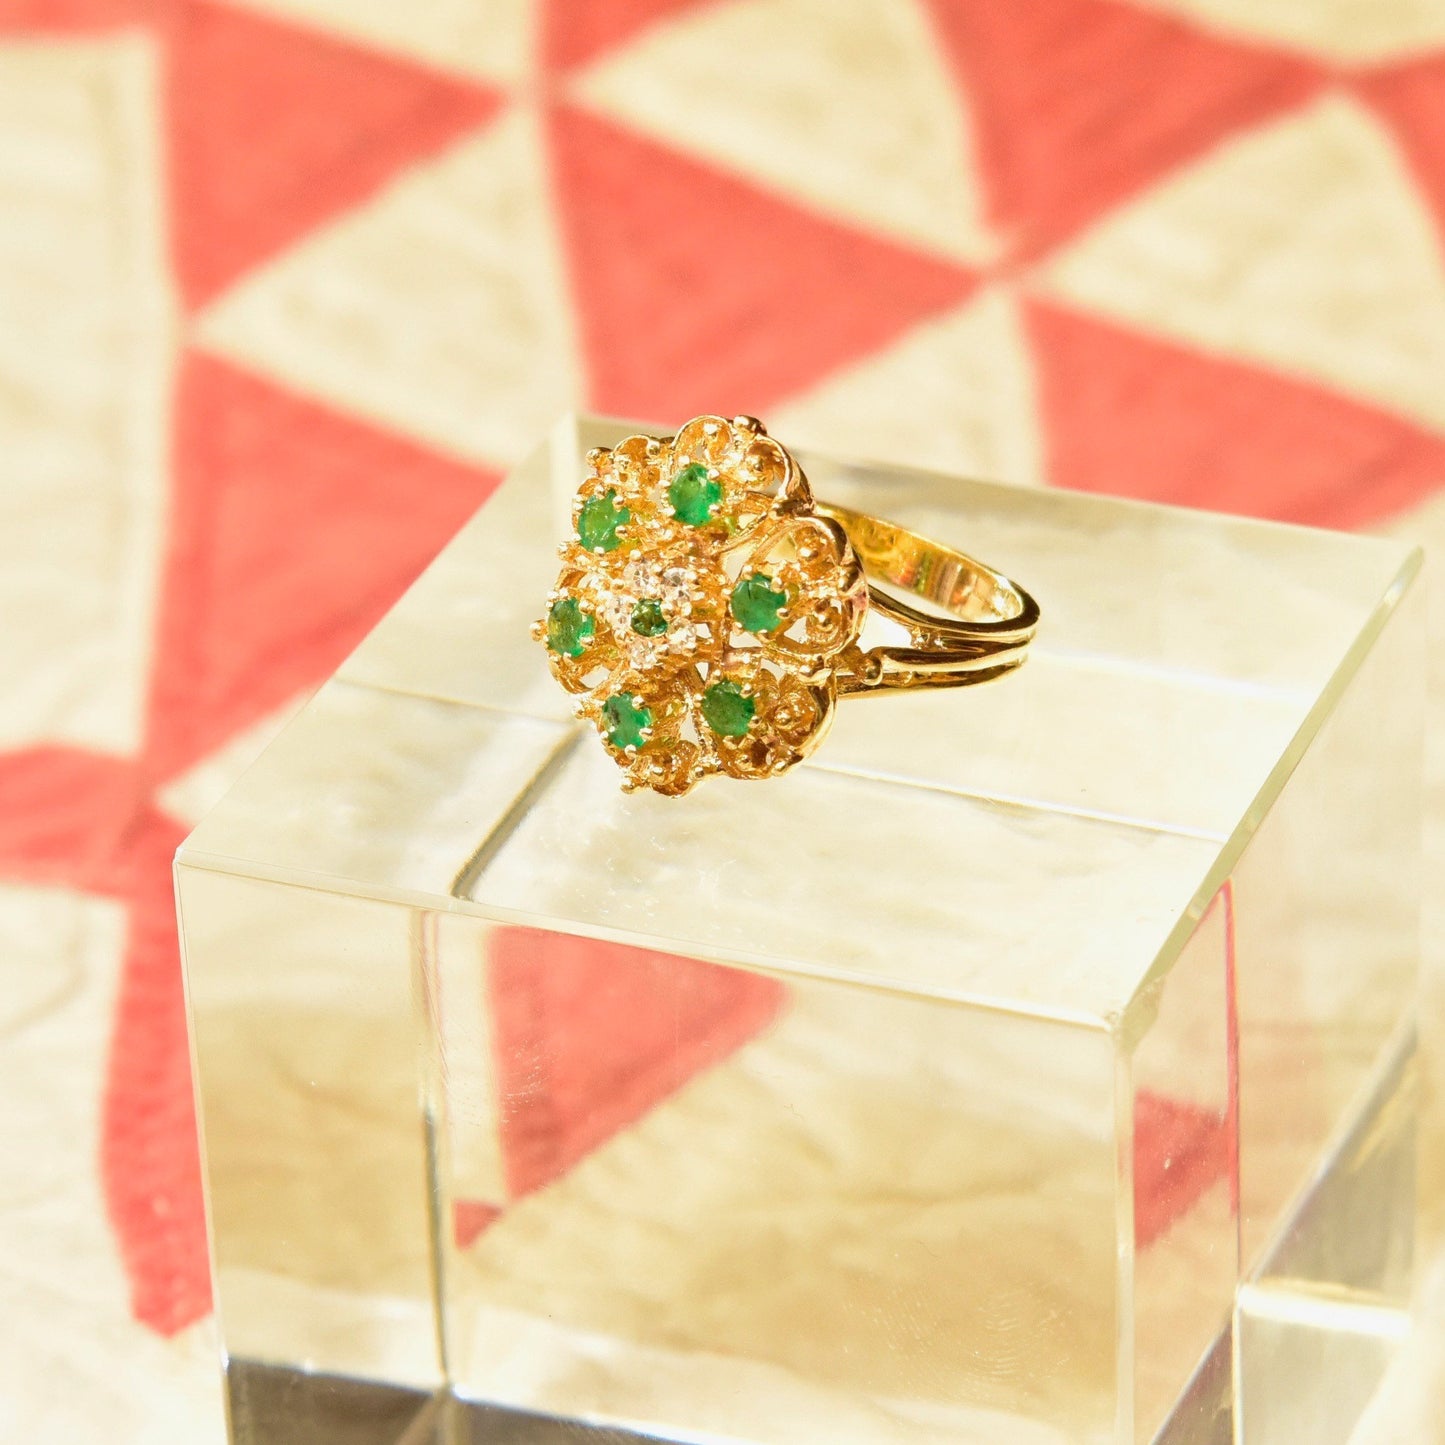 14K yellow gold emerald and diamond cluster cocktail ring featuring a floral dome design, size 7 1/2 US.